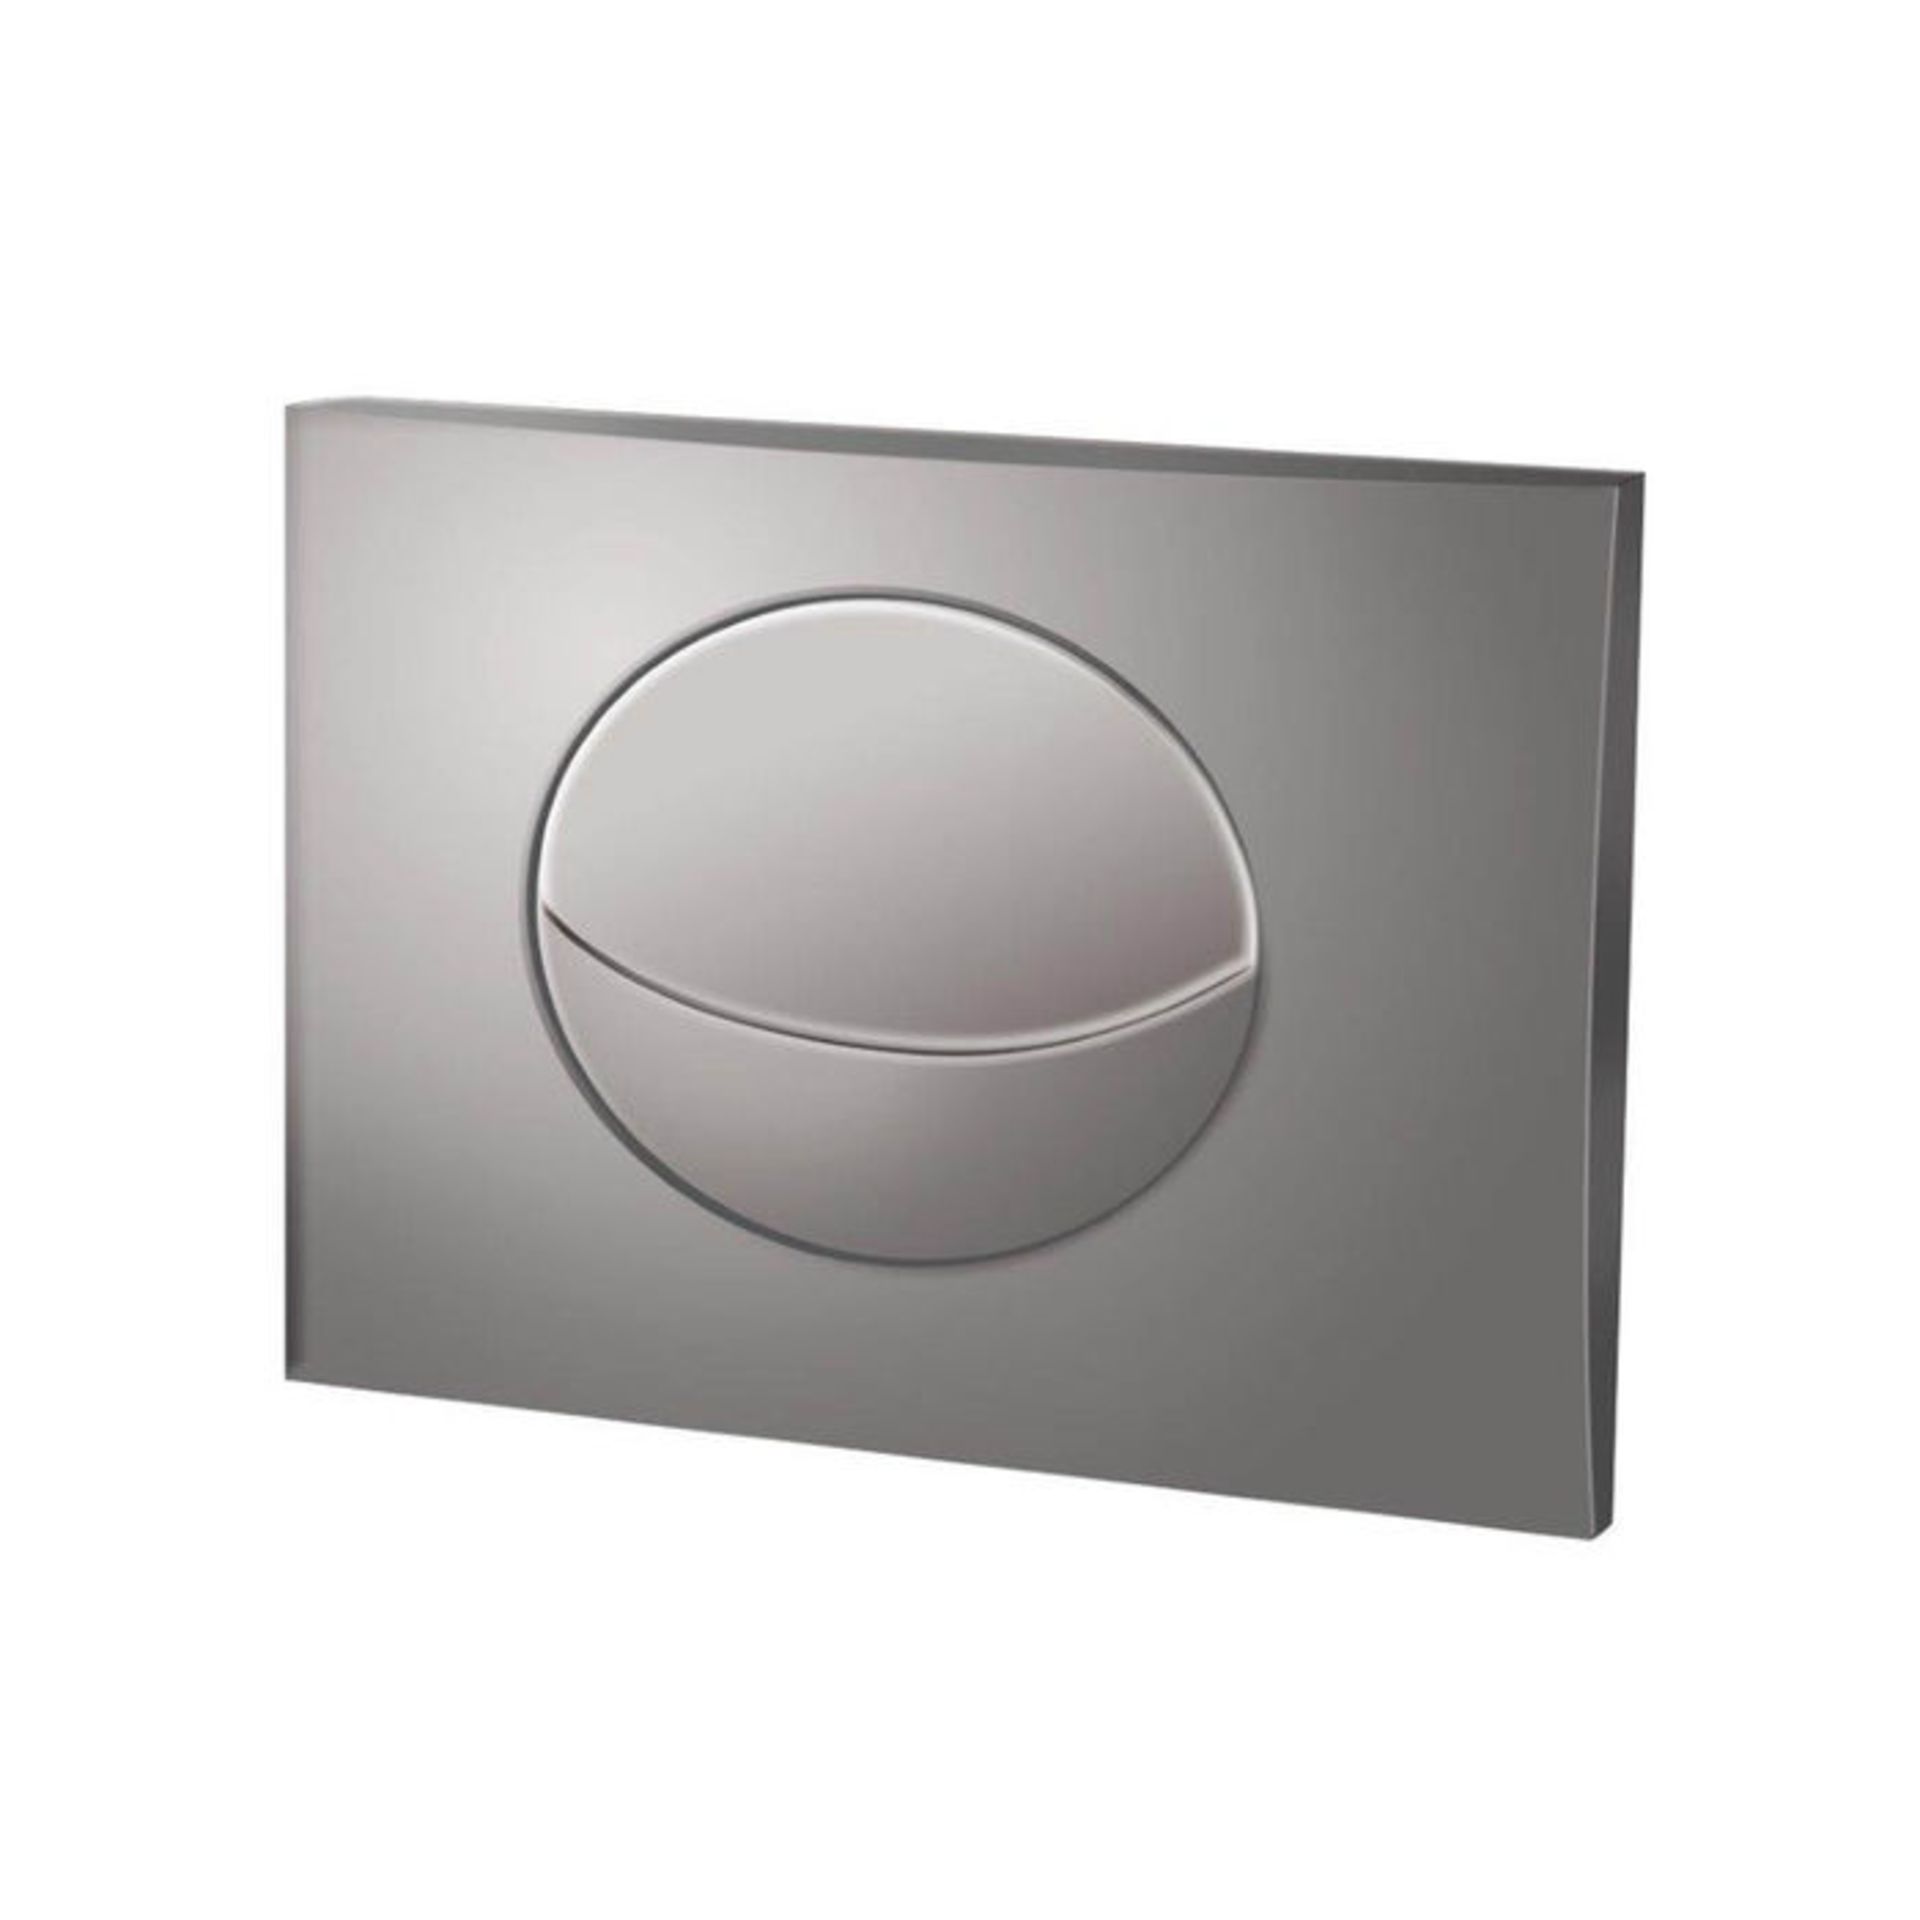 (MW21) Wall Hung Toilet Mounting Frame with Cistern and Chrome Dual Flush Plate. Compatible with all - Image 3 of 3